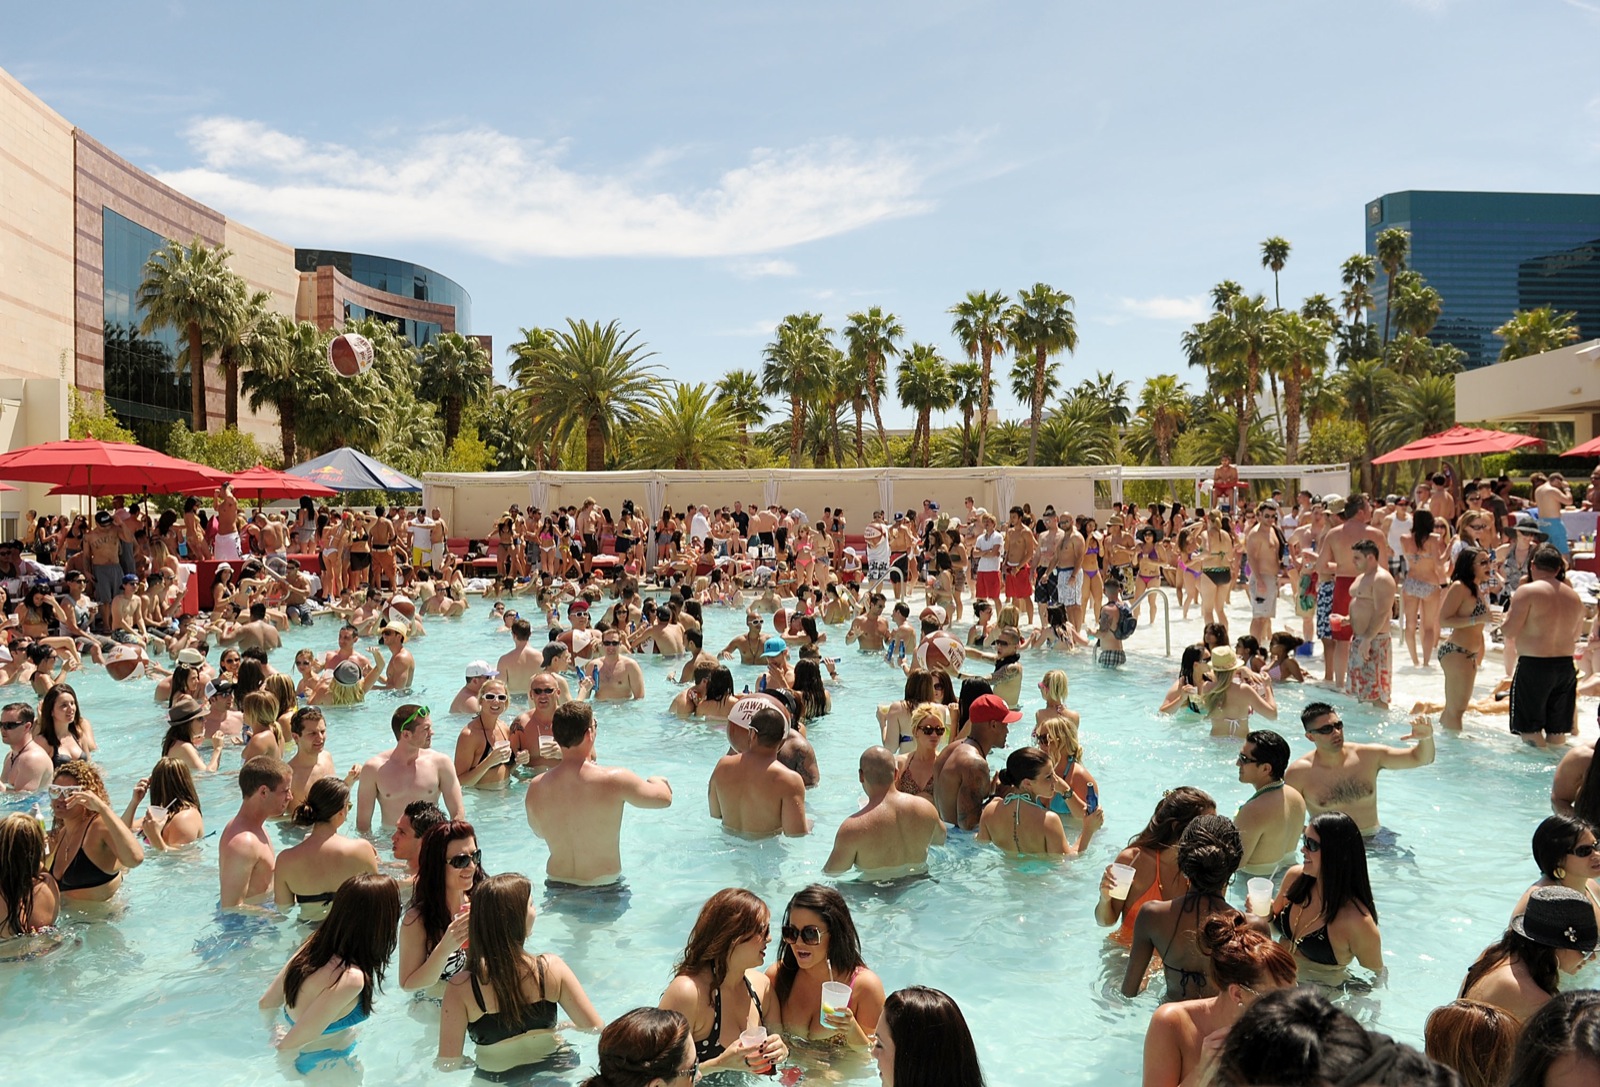 Official Website of Wet Republic Ultra Pool at MGM Grand